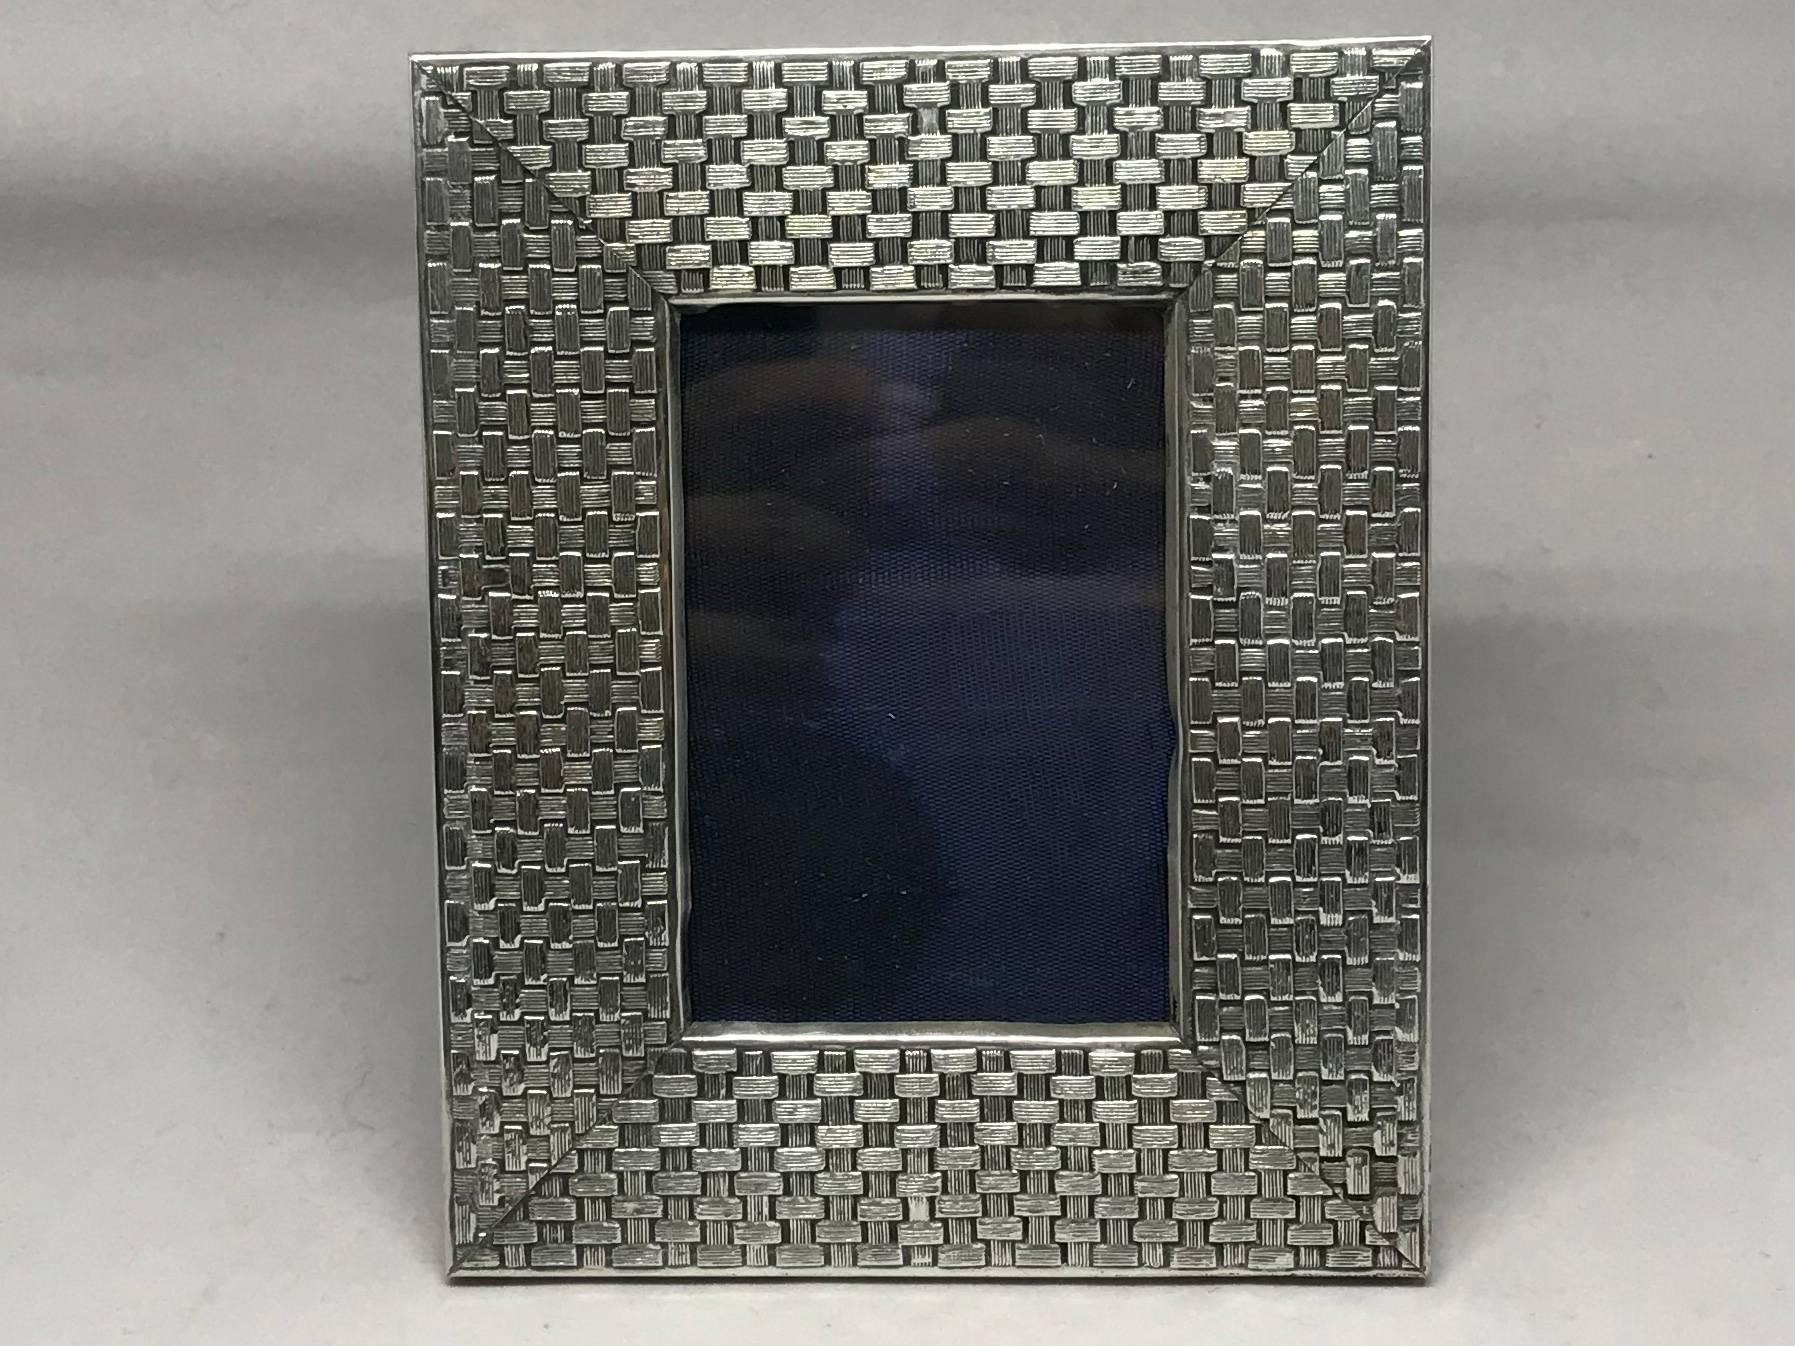 MIdcentury Italian sterling silver frame.  Rectangular woven basket pattern silver picture frame with lacquered wood easel back for horizontal or vertical display.  Stamp marks for Italian sterling; in excellent vintage condition.  Italy, circa